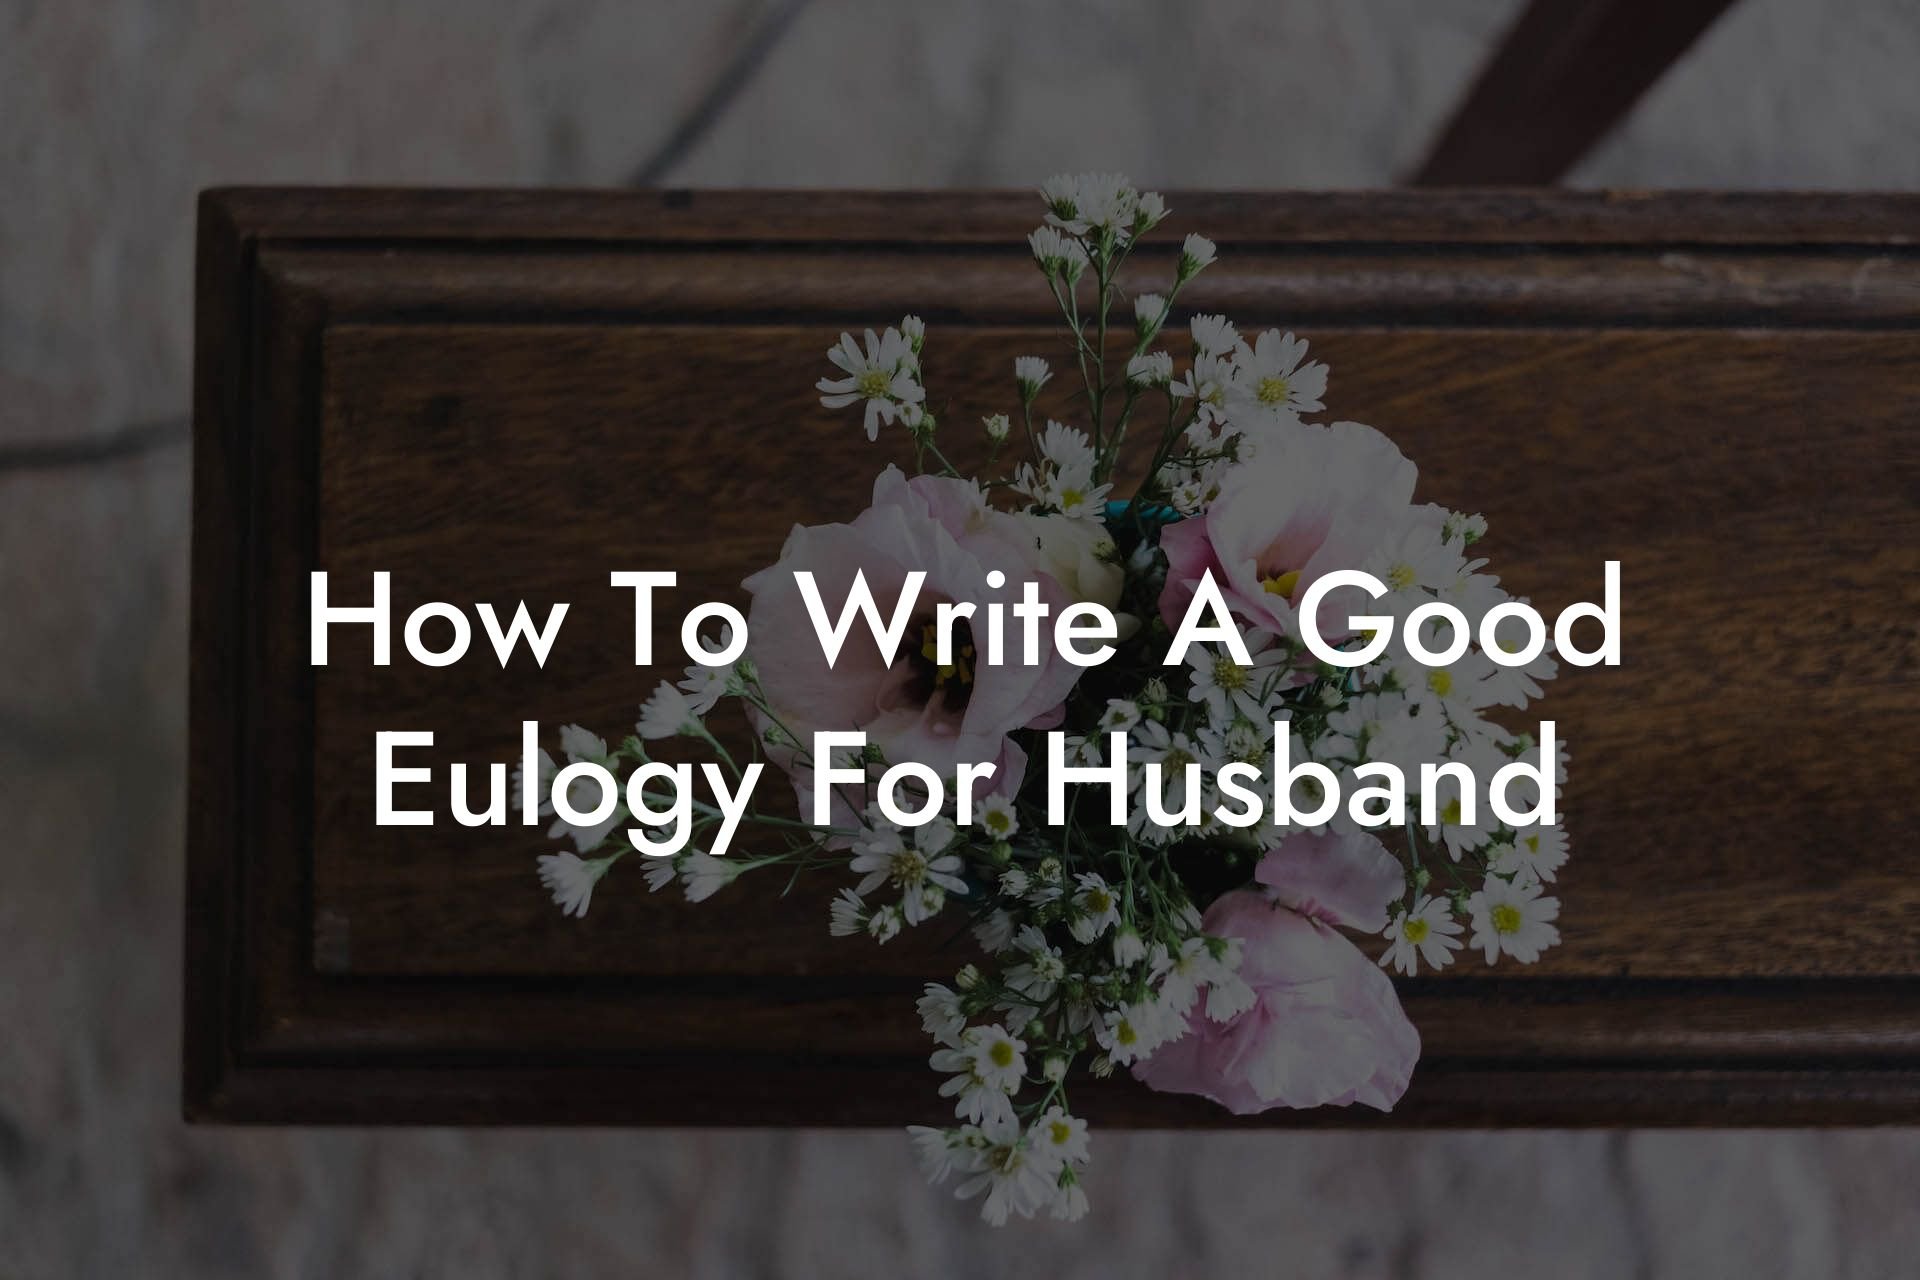 How To Write A Good Eulogy For Husband